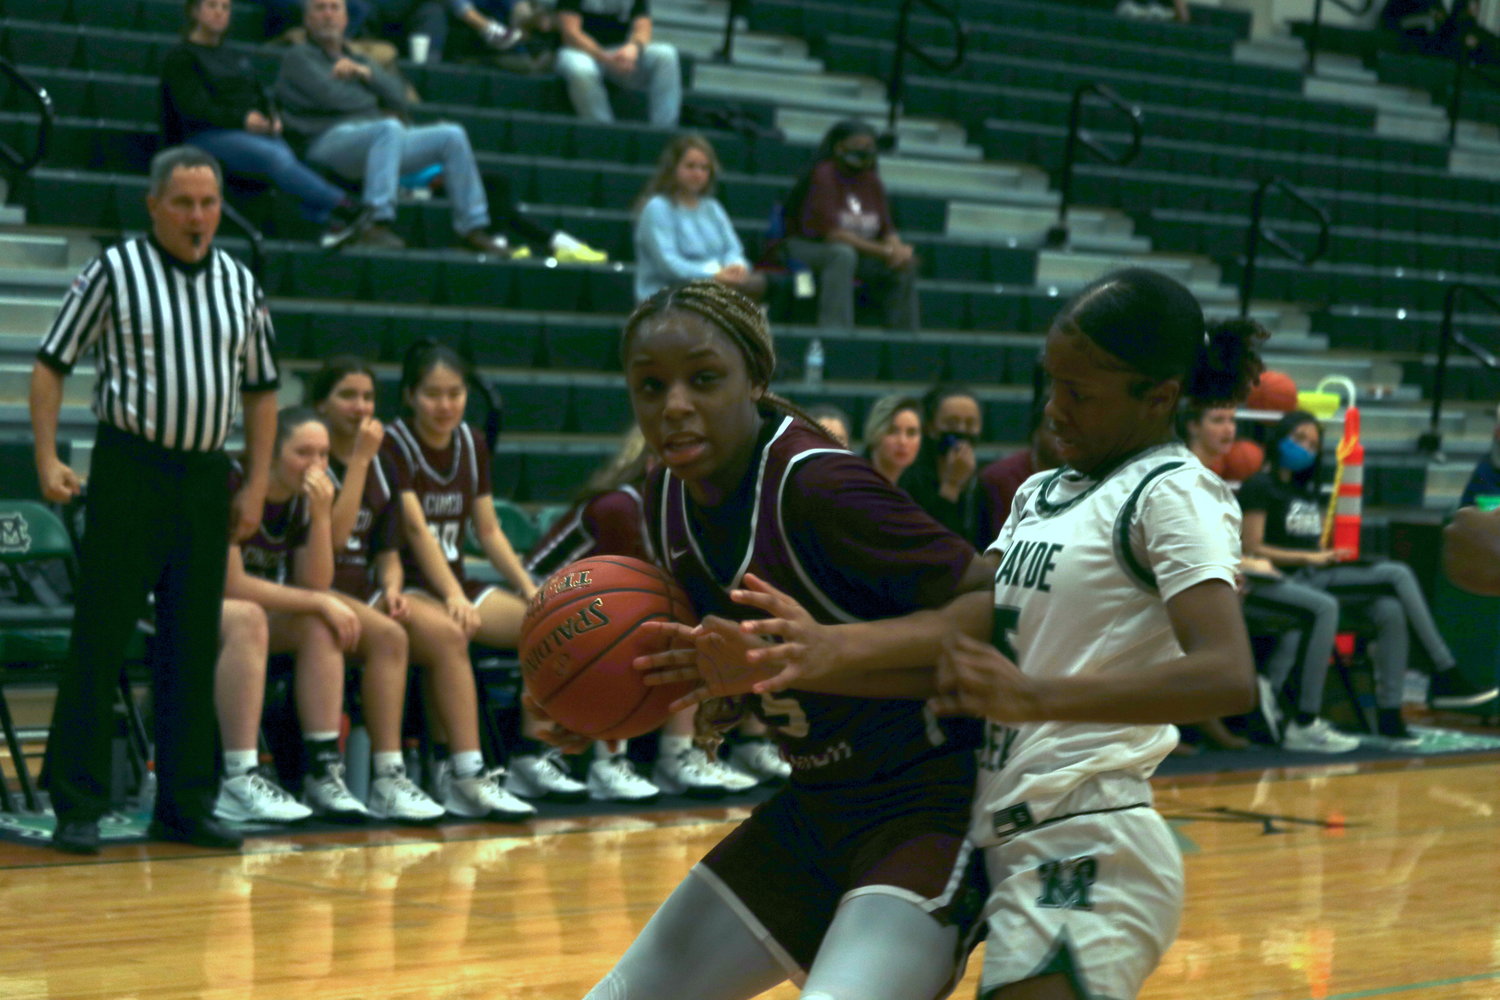 Cinco Ranch’s Aniya Foy backs down a defender during Friday’s District 19-6A game against Mayde Creek at the Mayde Creek gym.